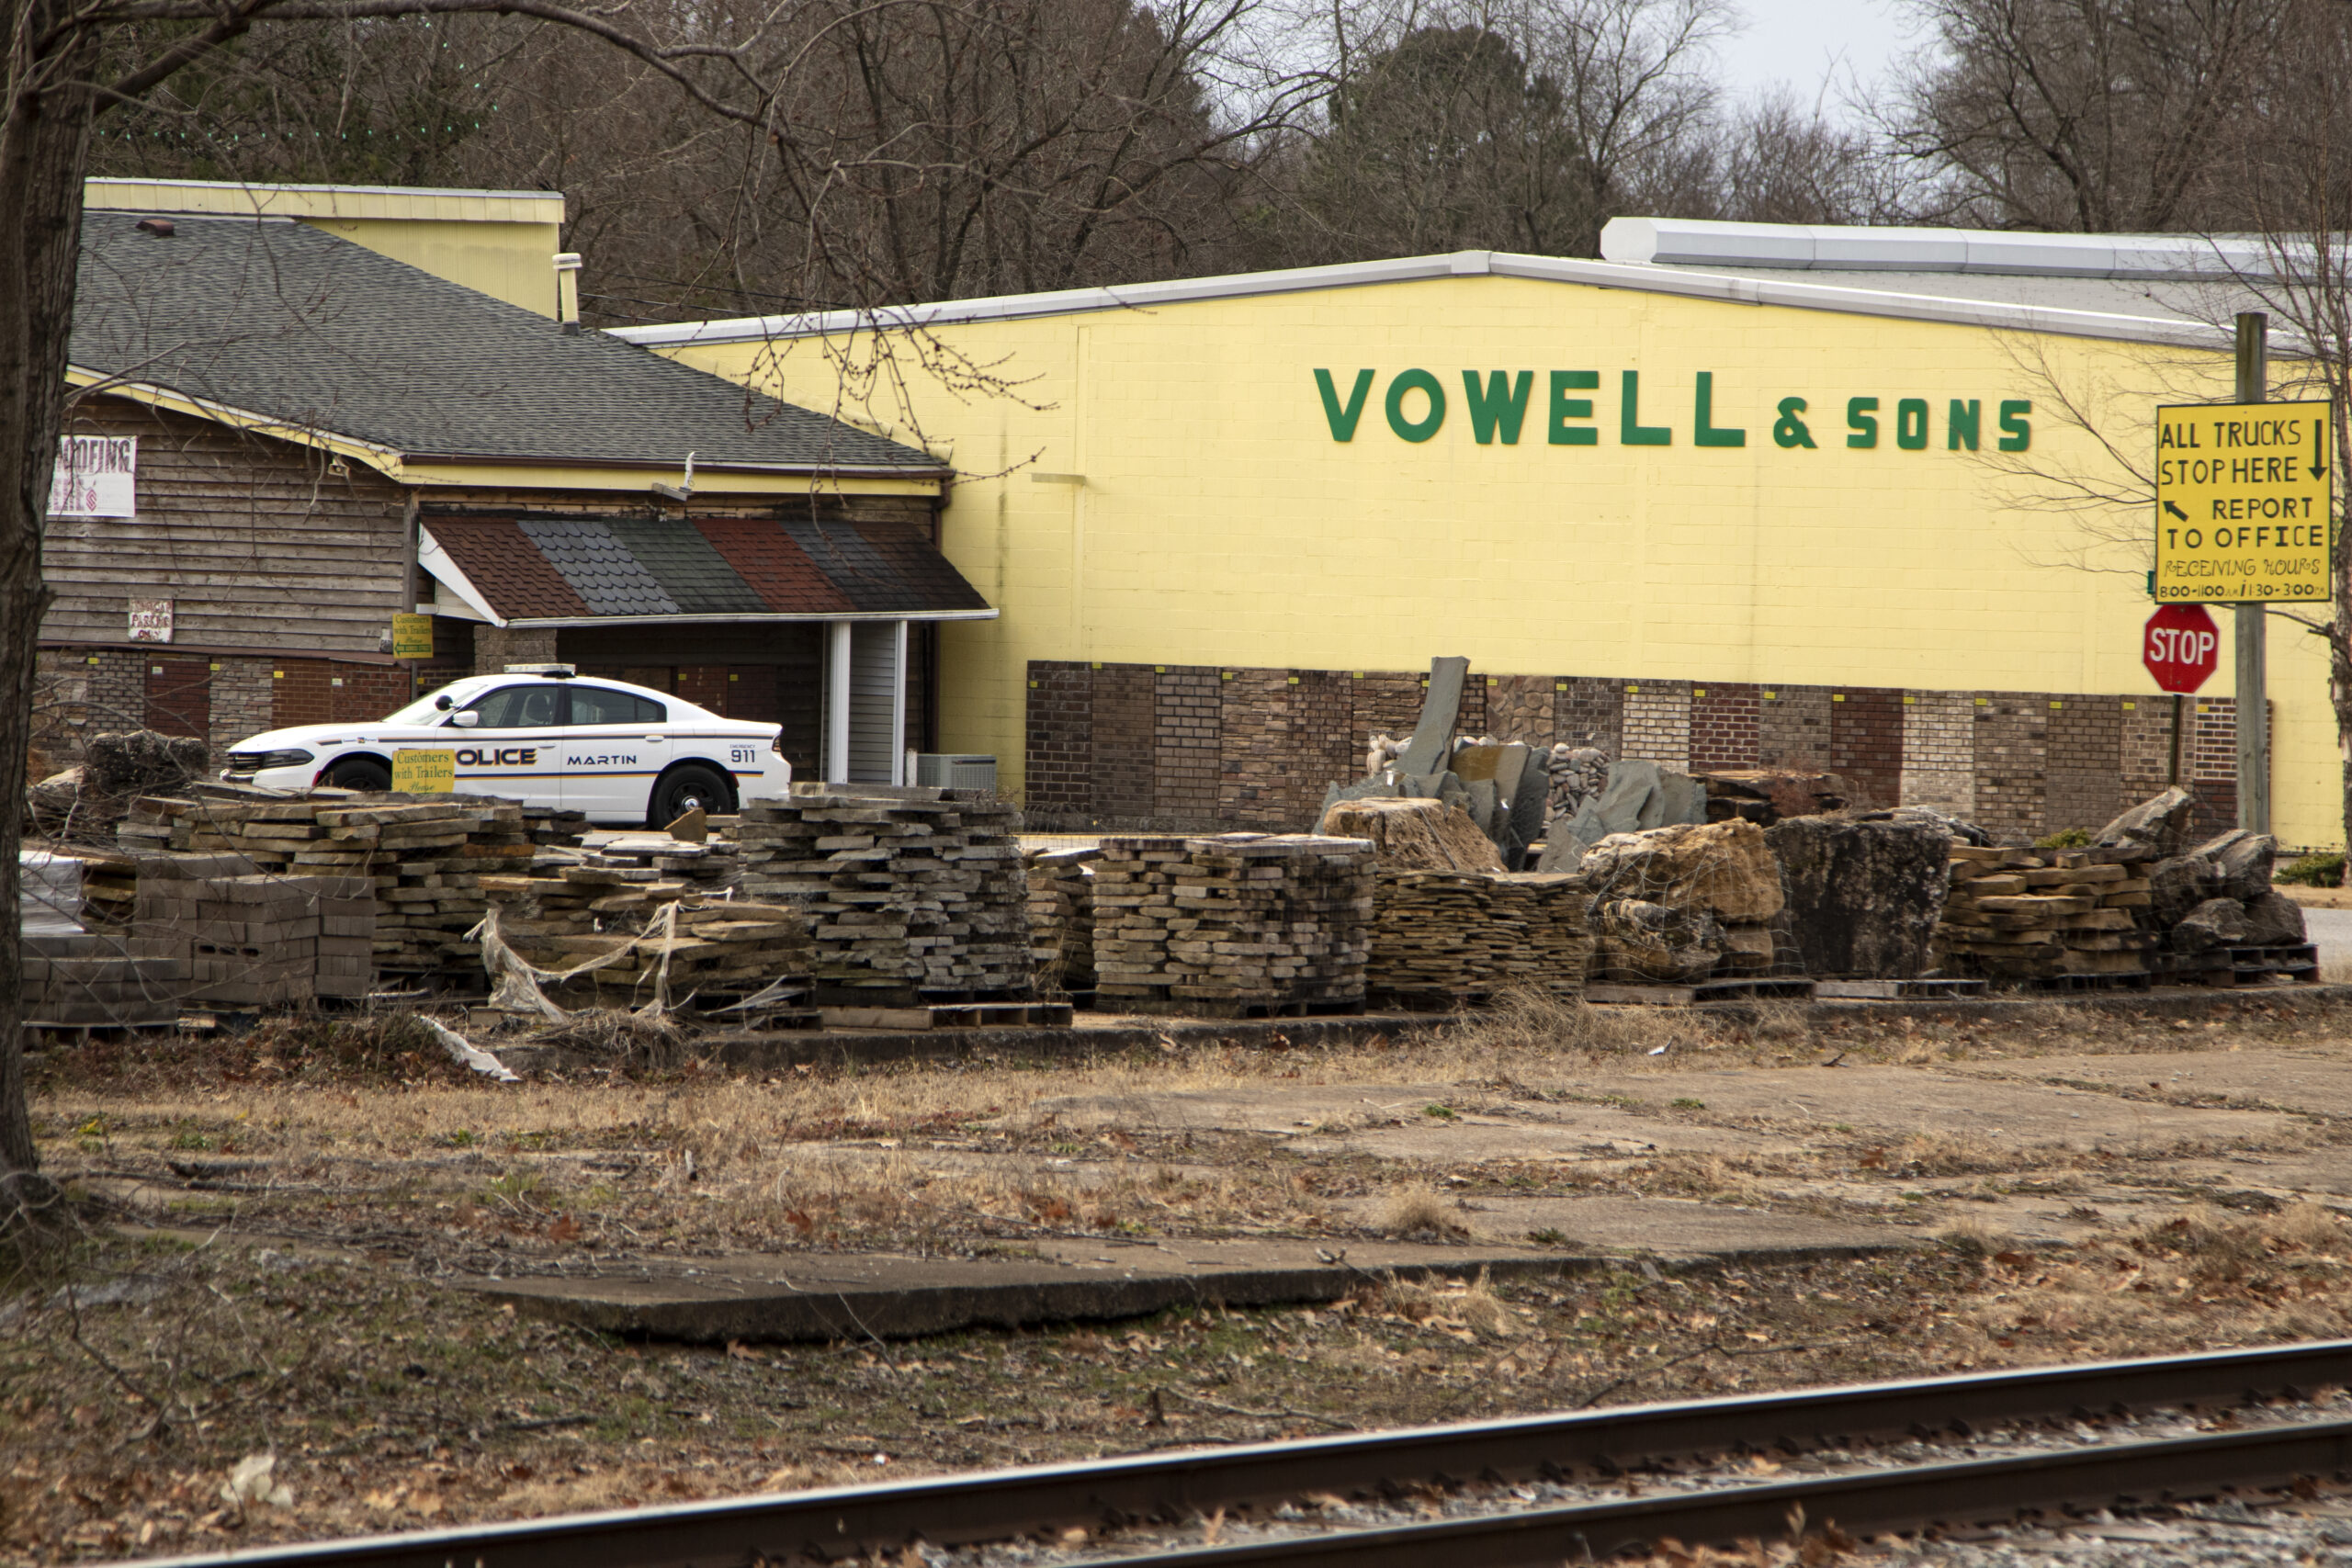 Martin police car parked outside Vowell and Sons, David Vowell's family business.